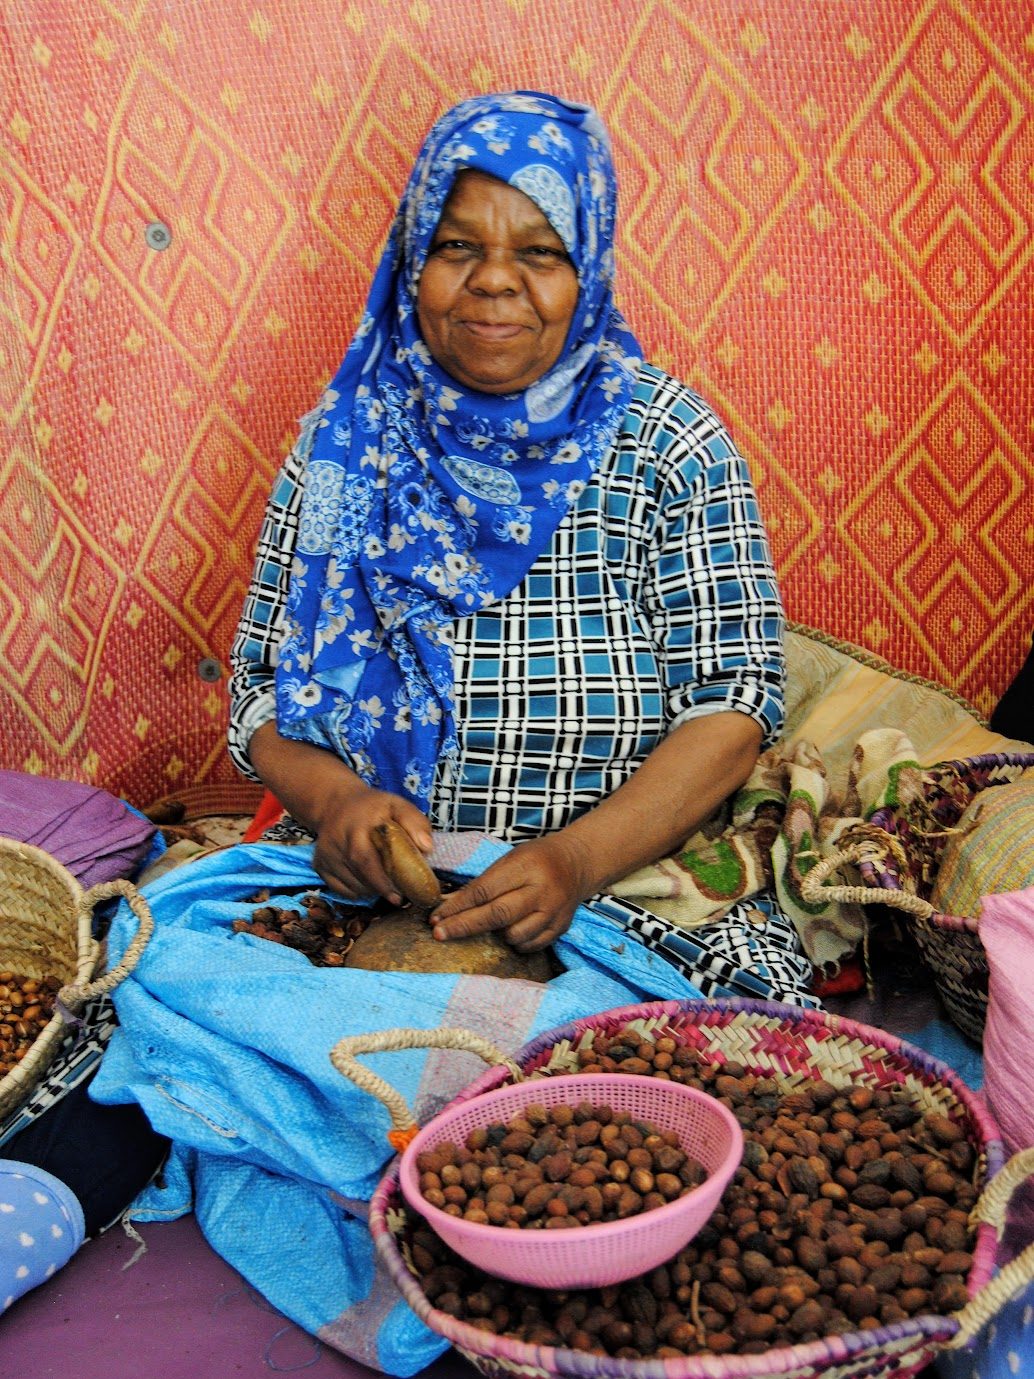 A woman in a blue hijab sitting and making argan oil